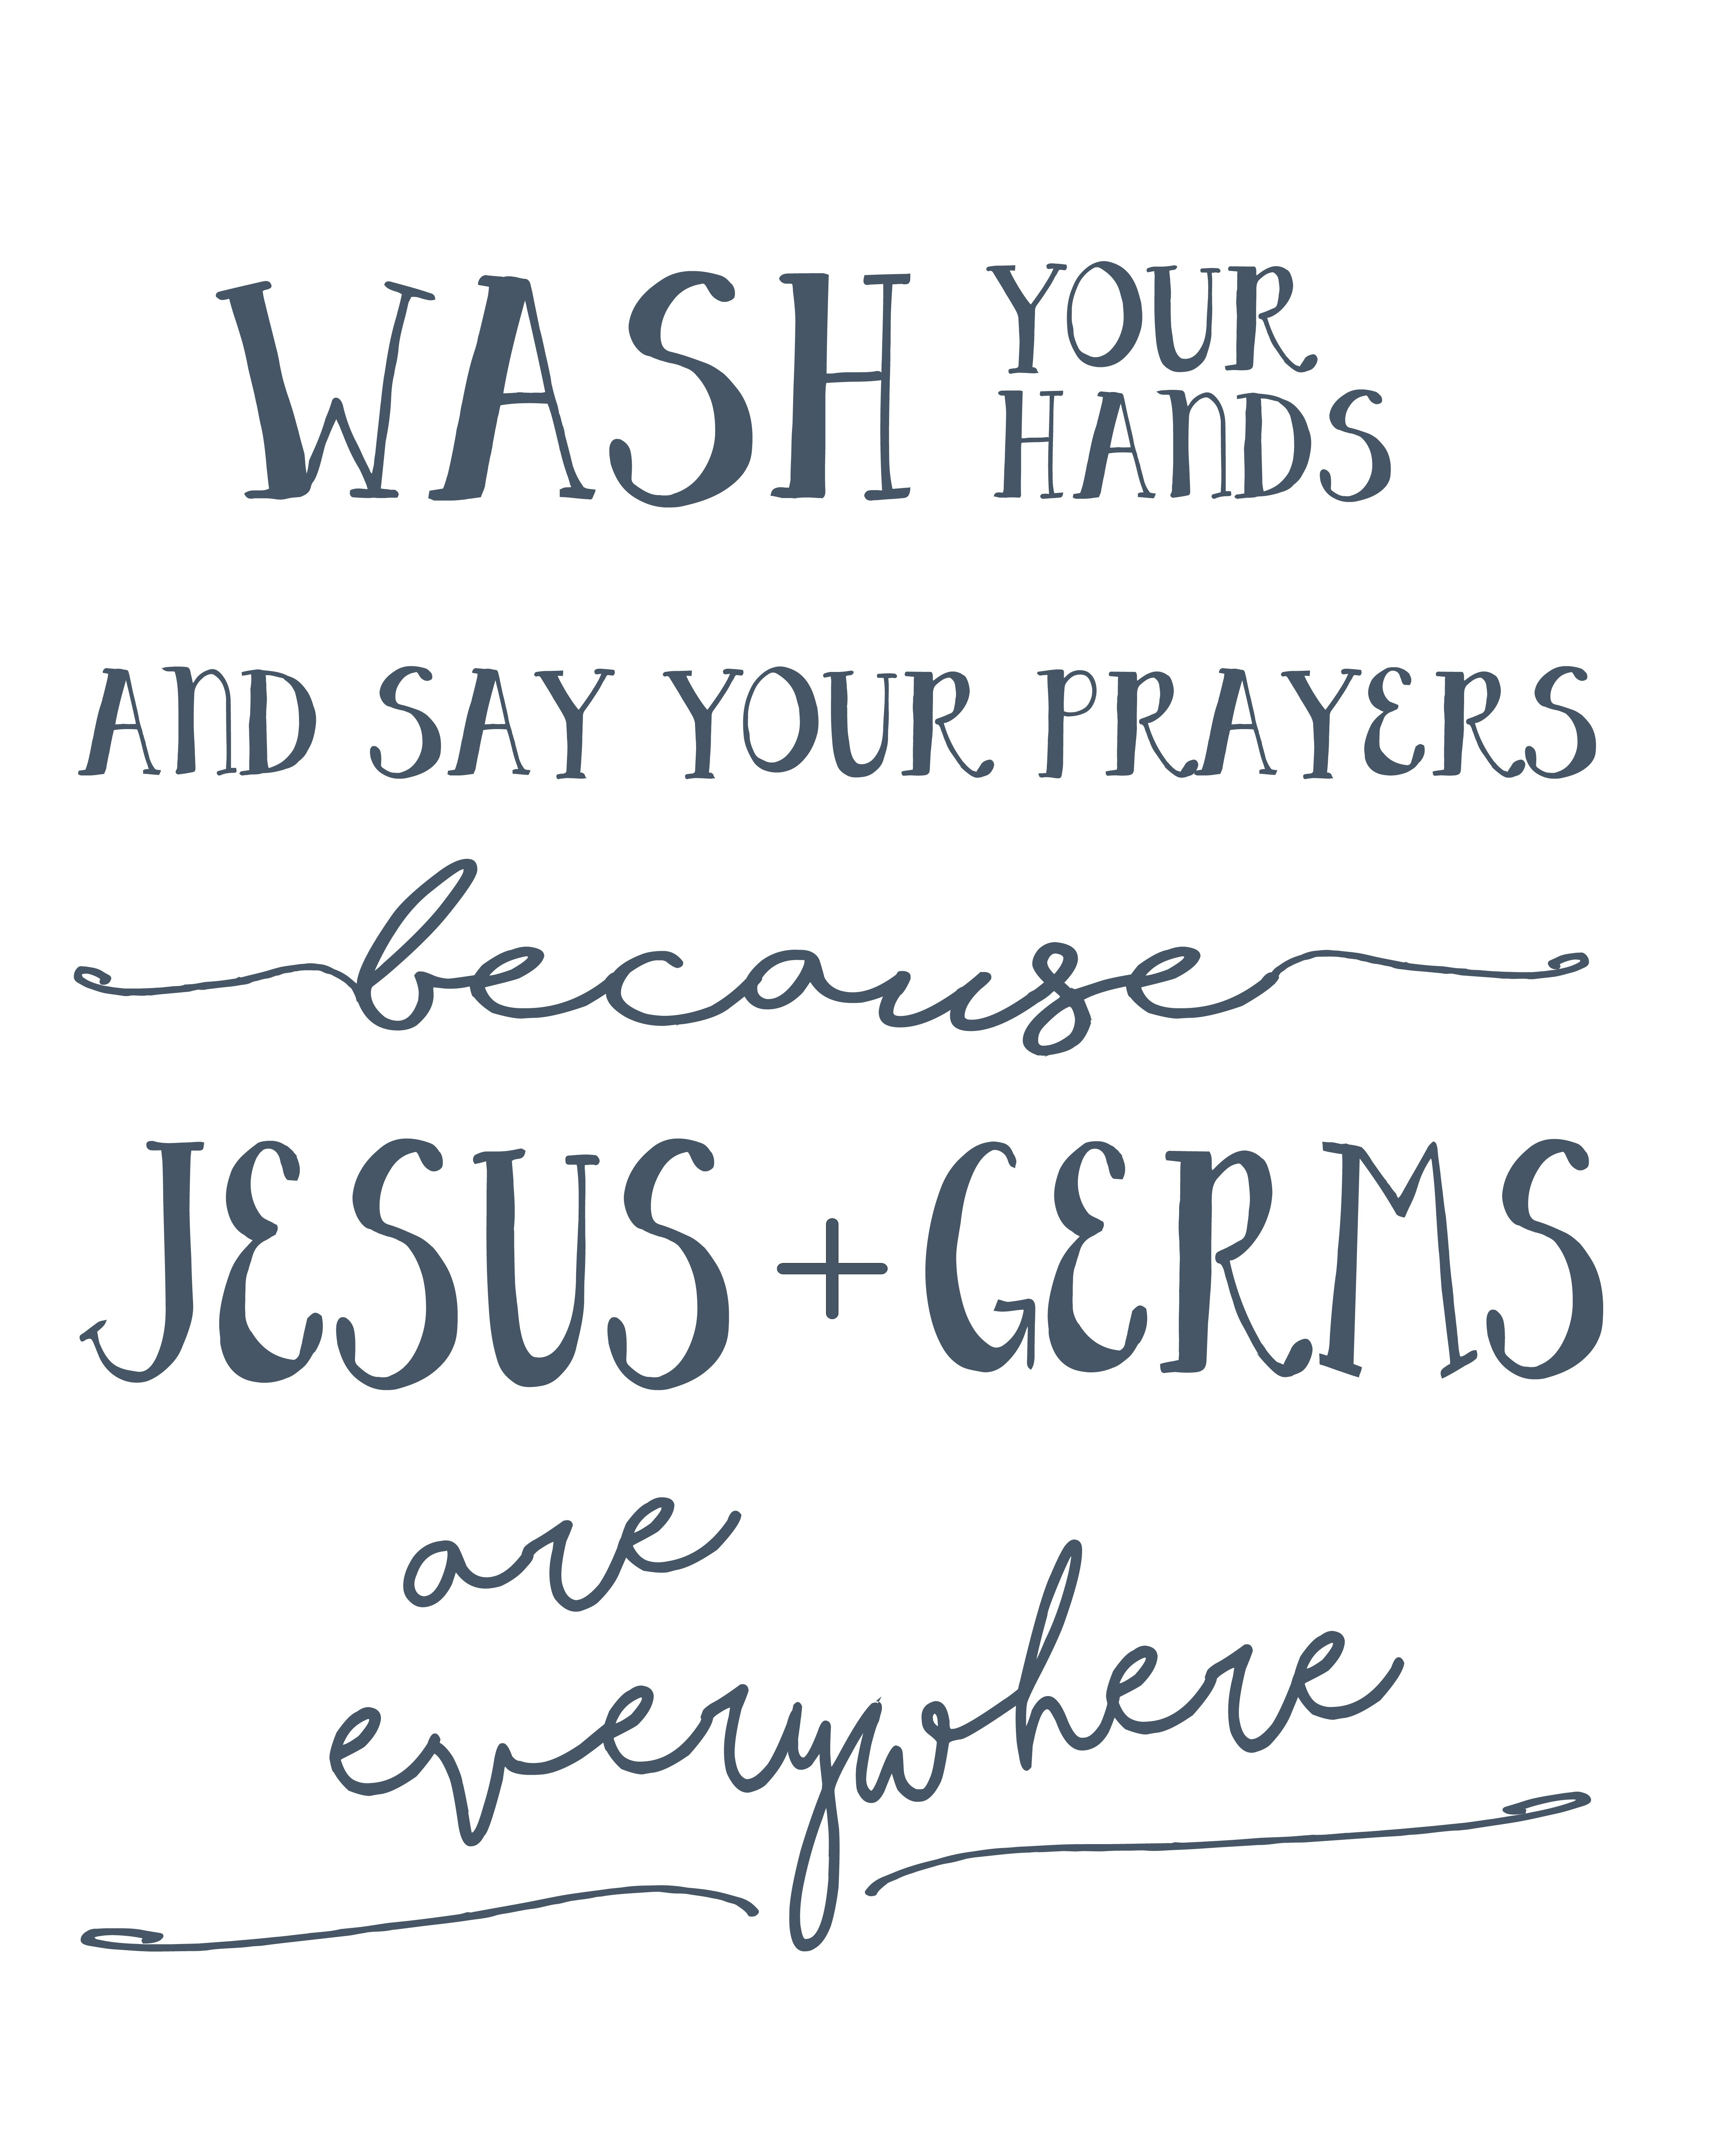 Wash Your Hands And Say Your Prayers Free Printable | Arts &amp;amp; Crafts - Wash Your Hands And Say Your Prayers Free Printable